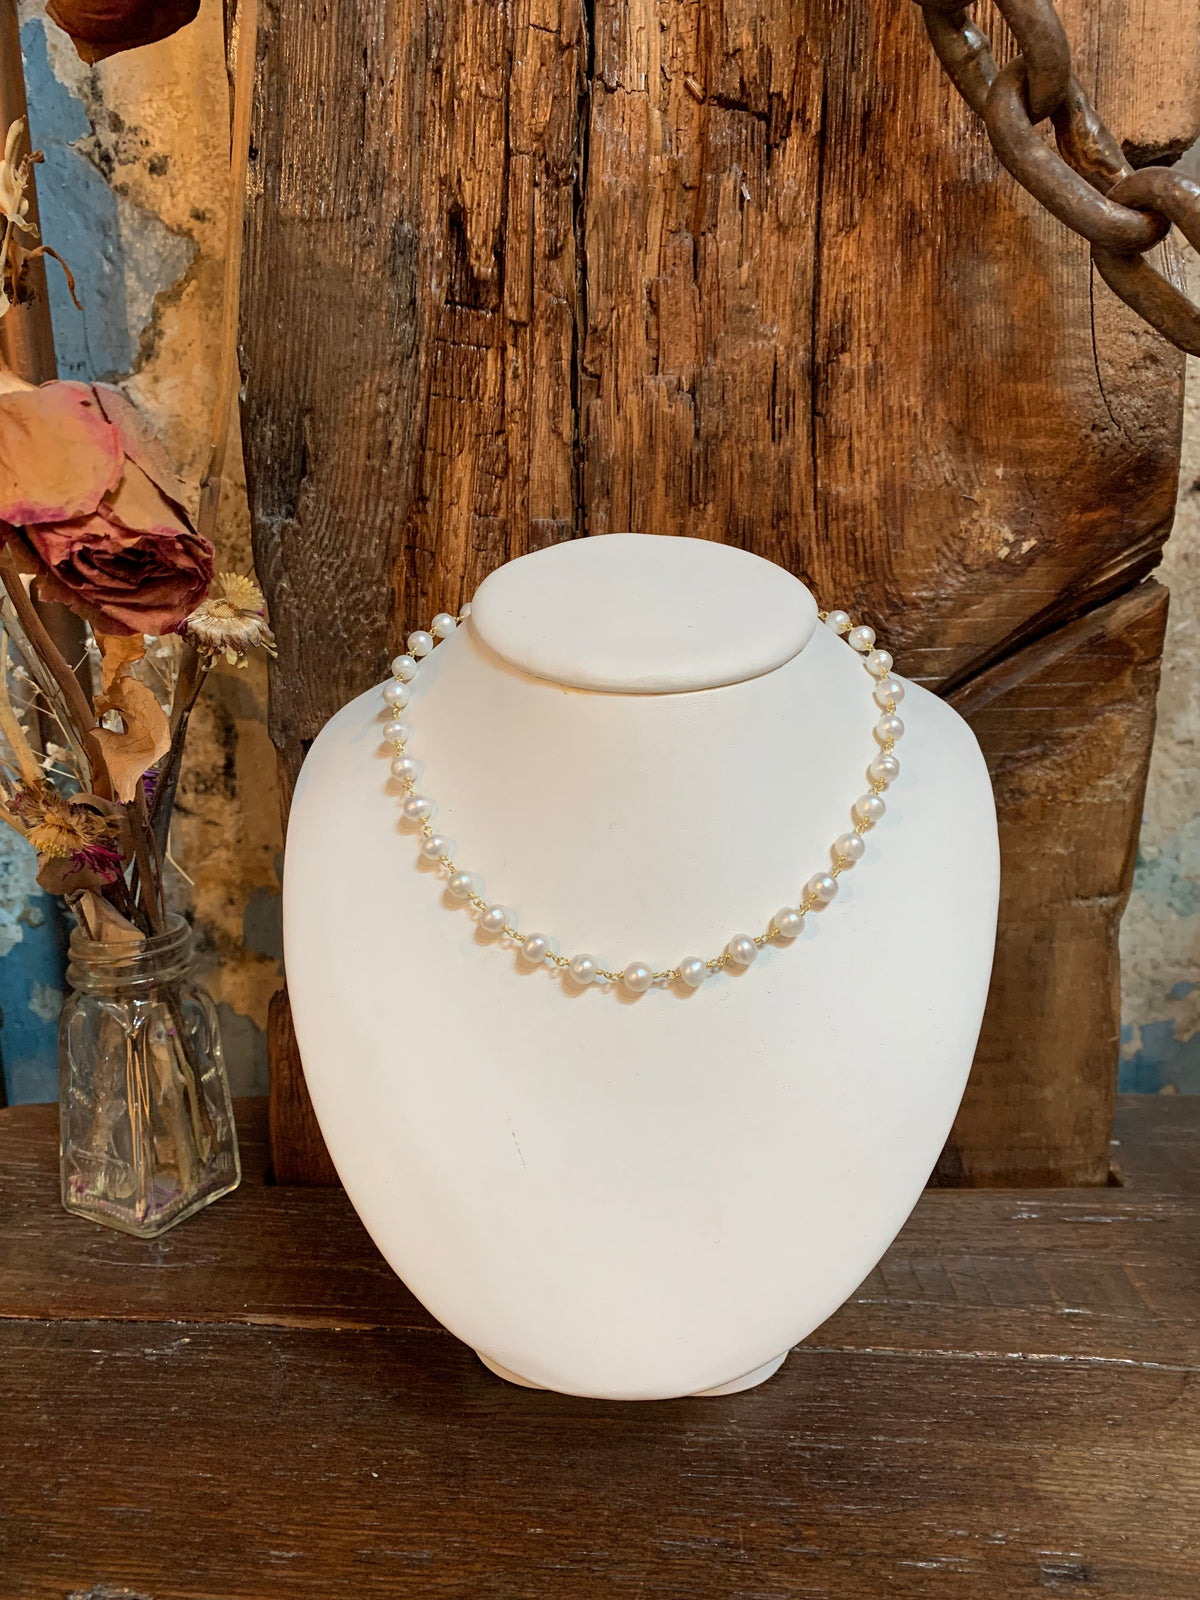 Susan Rifkin Chunky Gold And Pearl Choker Necklace